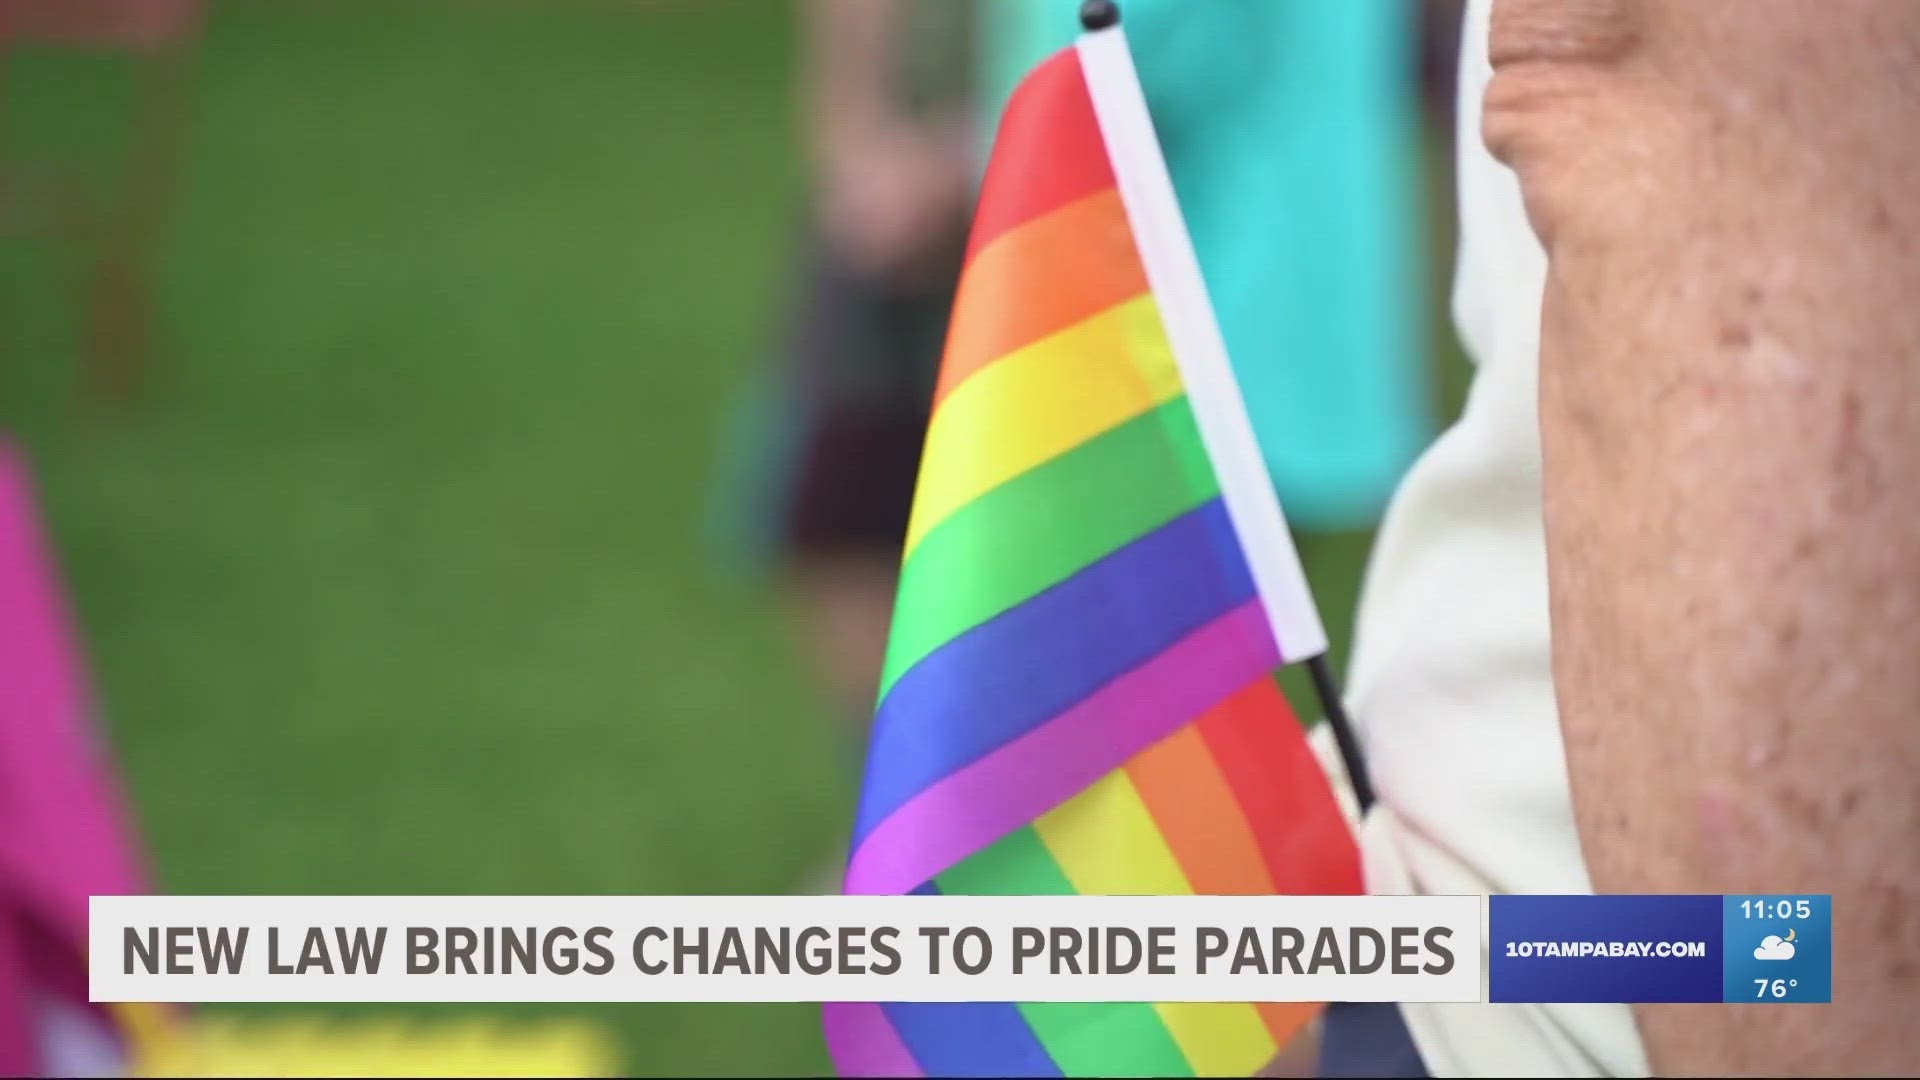 June kicks off the beginning of Pride month and those in the LGBTQ community raised pride flags to celebrate who they are.